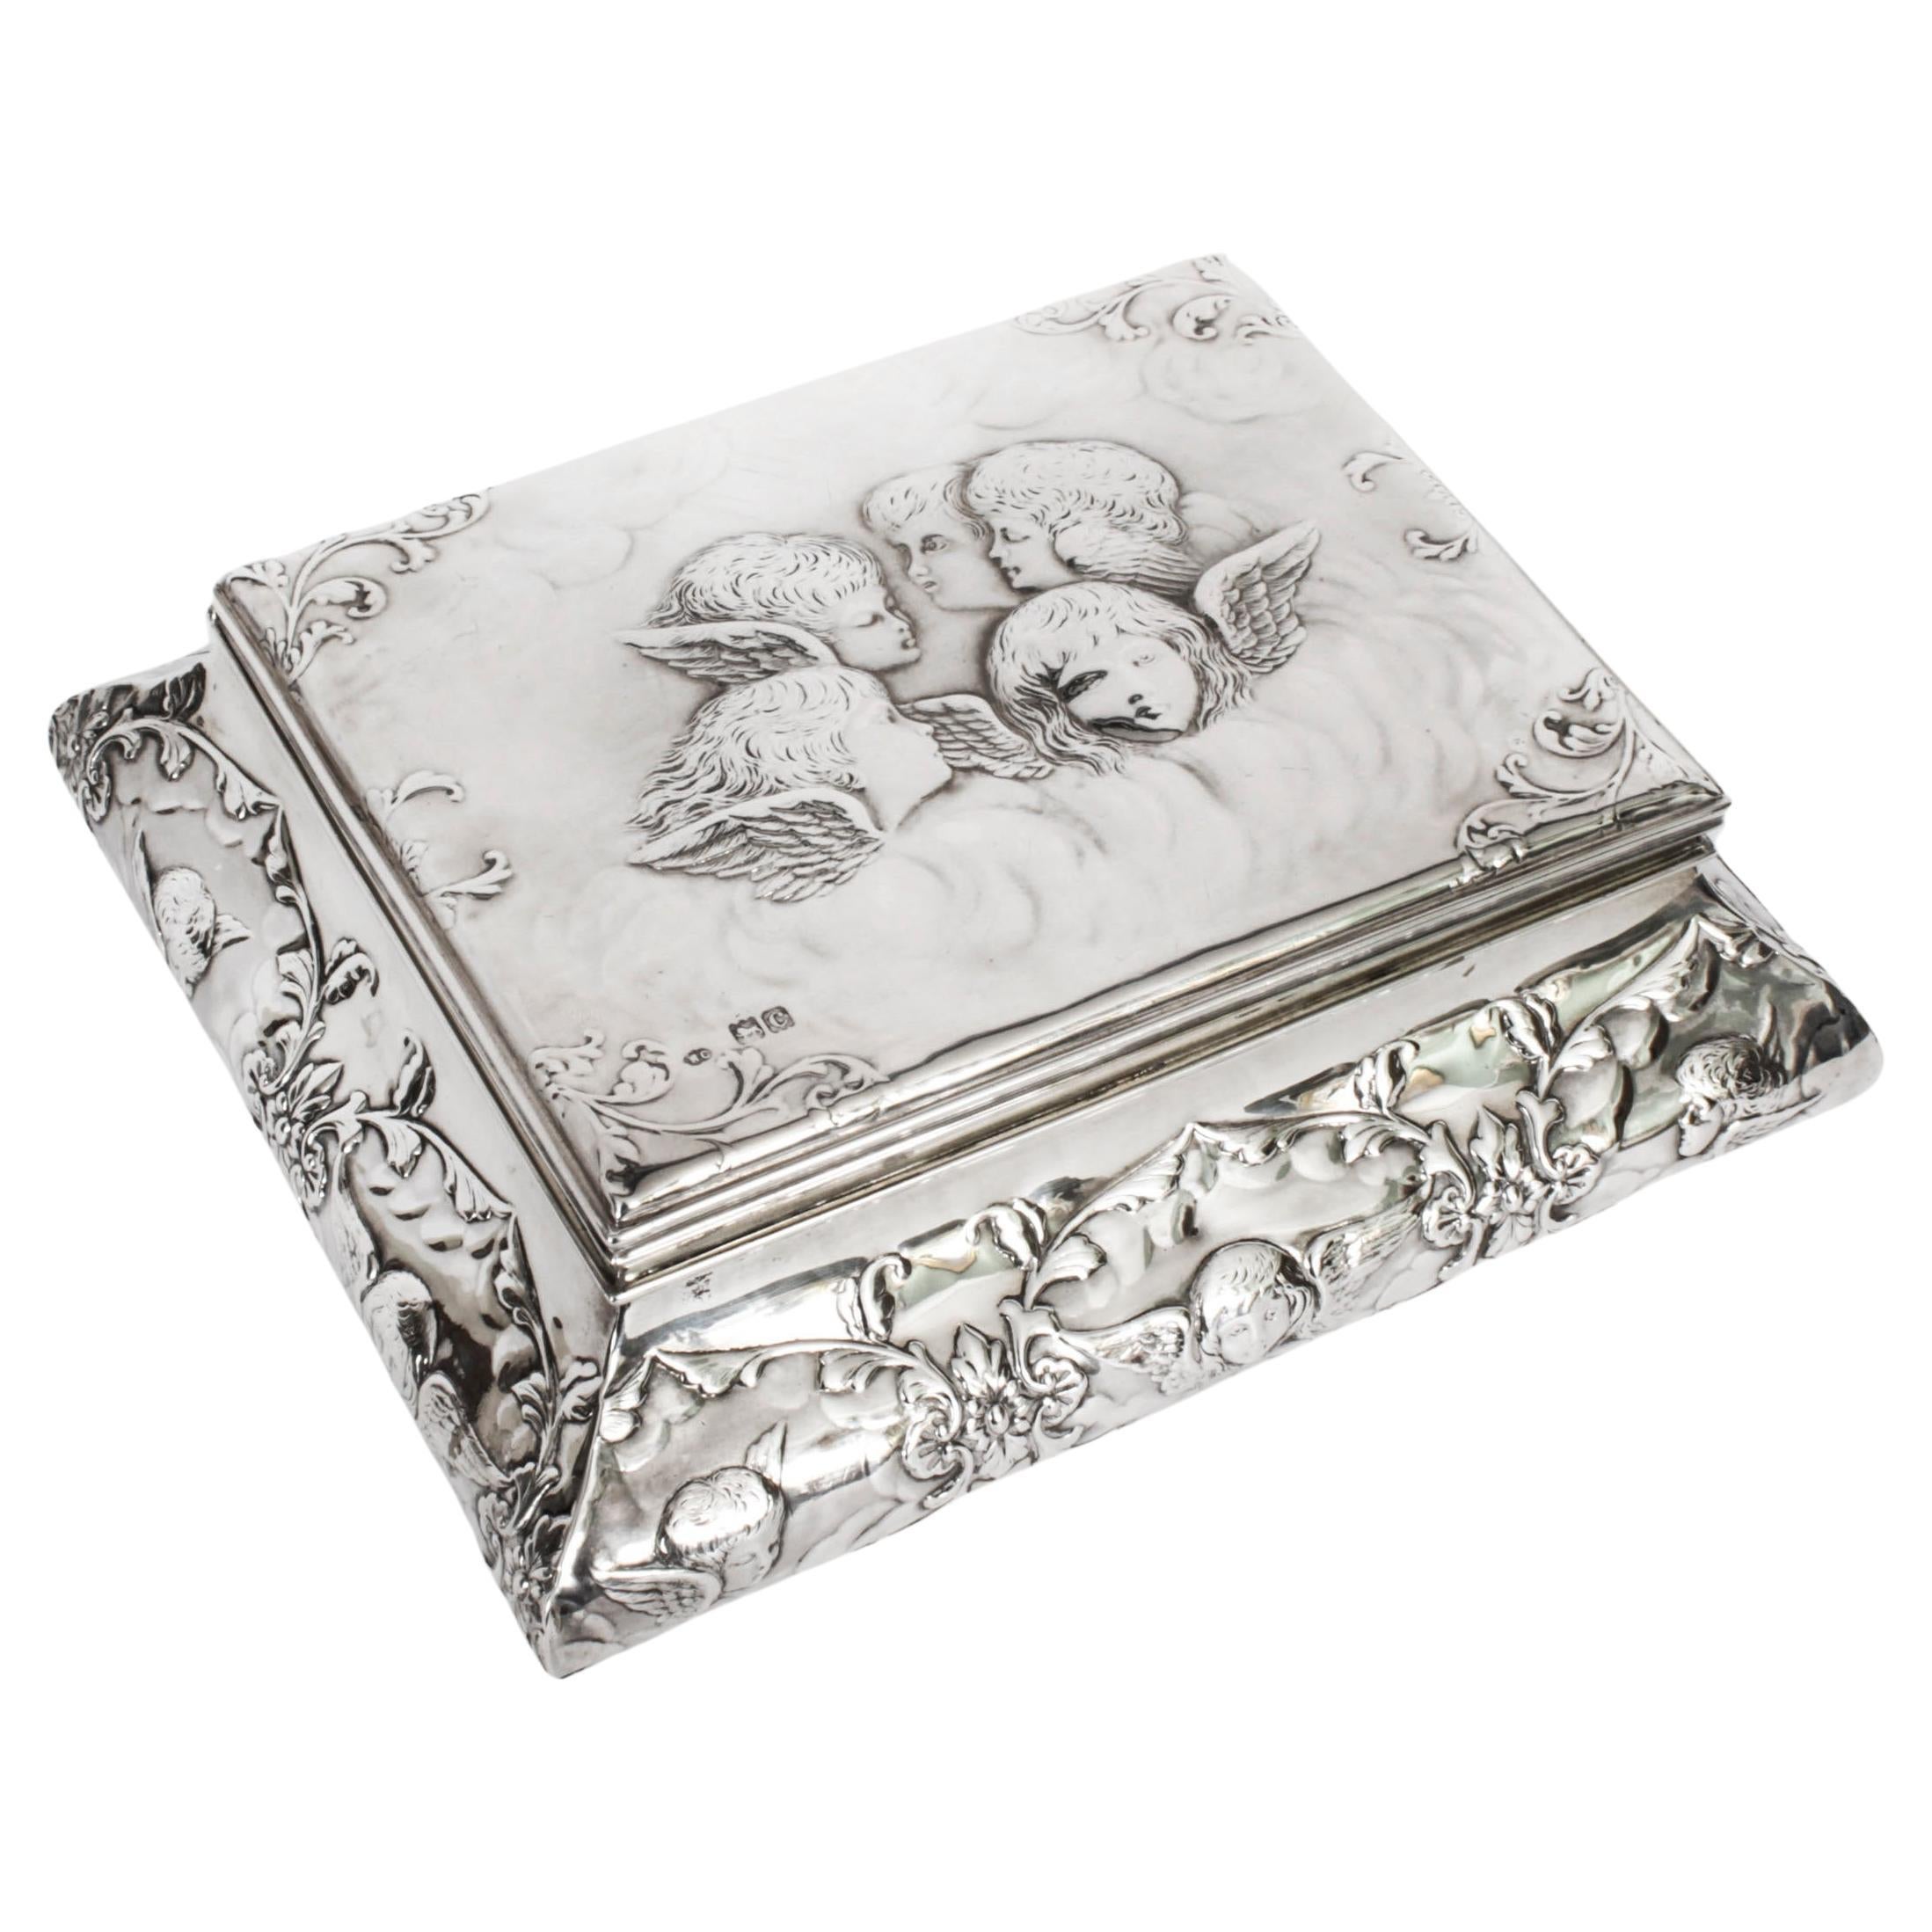 Antique Victorian Sterling Silver Casket by William Comyns & Sons 1898 For Sale